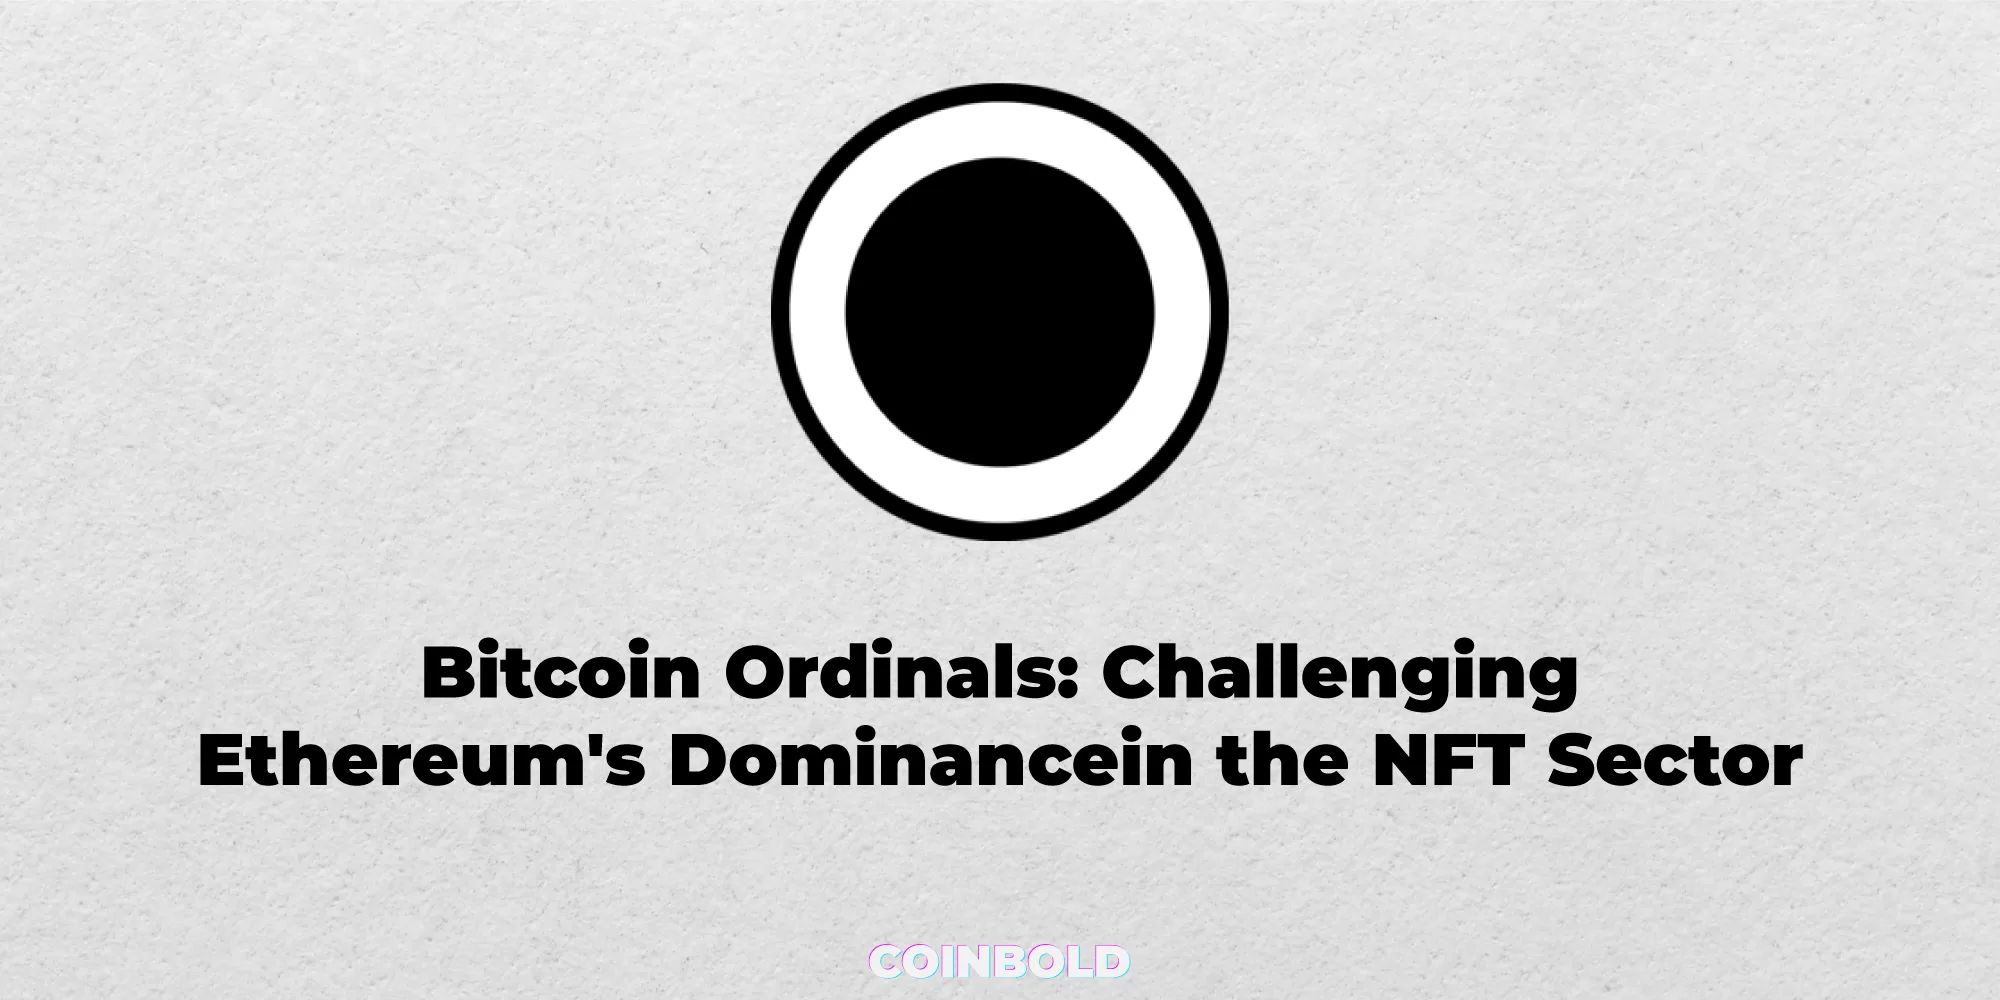 Bitcoin Ordinals: Challenging Ethereum's Dominance in the NFT Sector